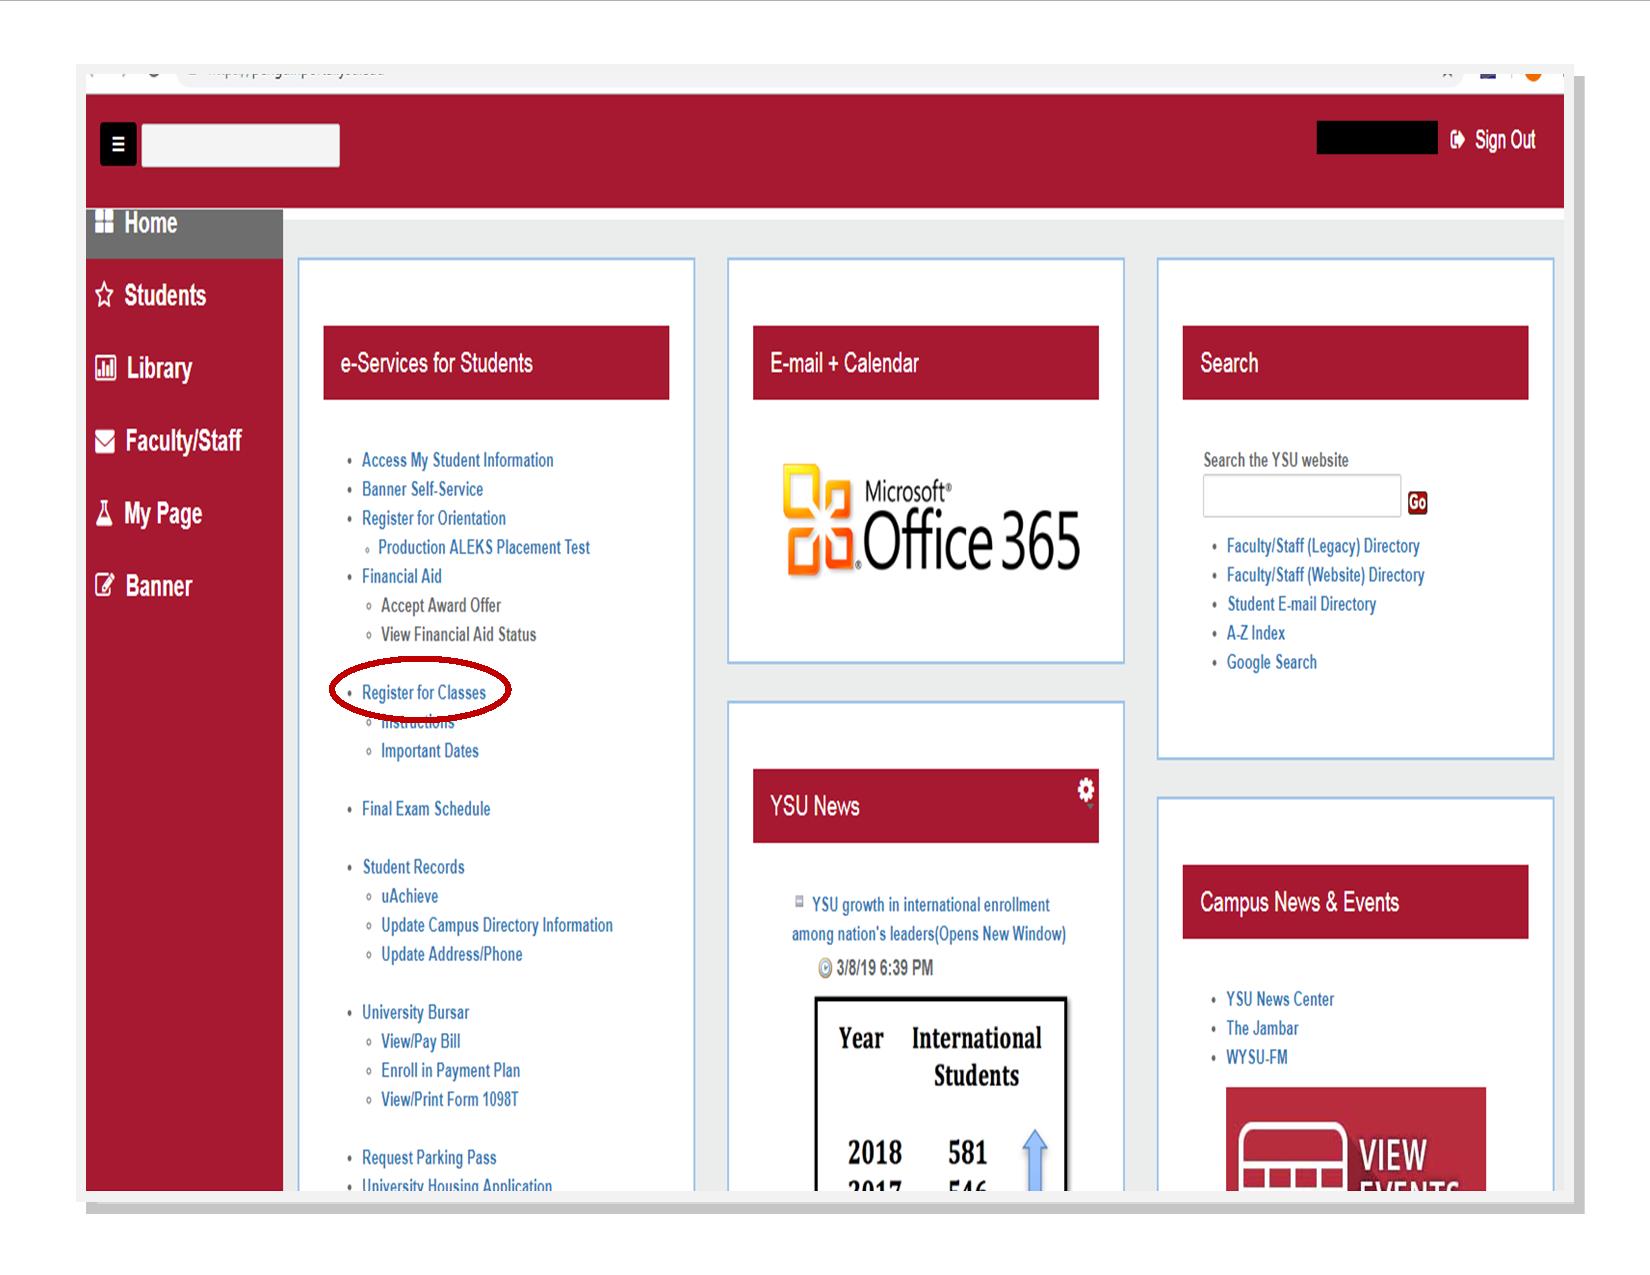 Under e-Services for Students in Penguin Portal, select "Register for Classes".